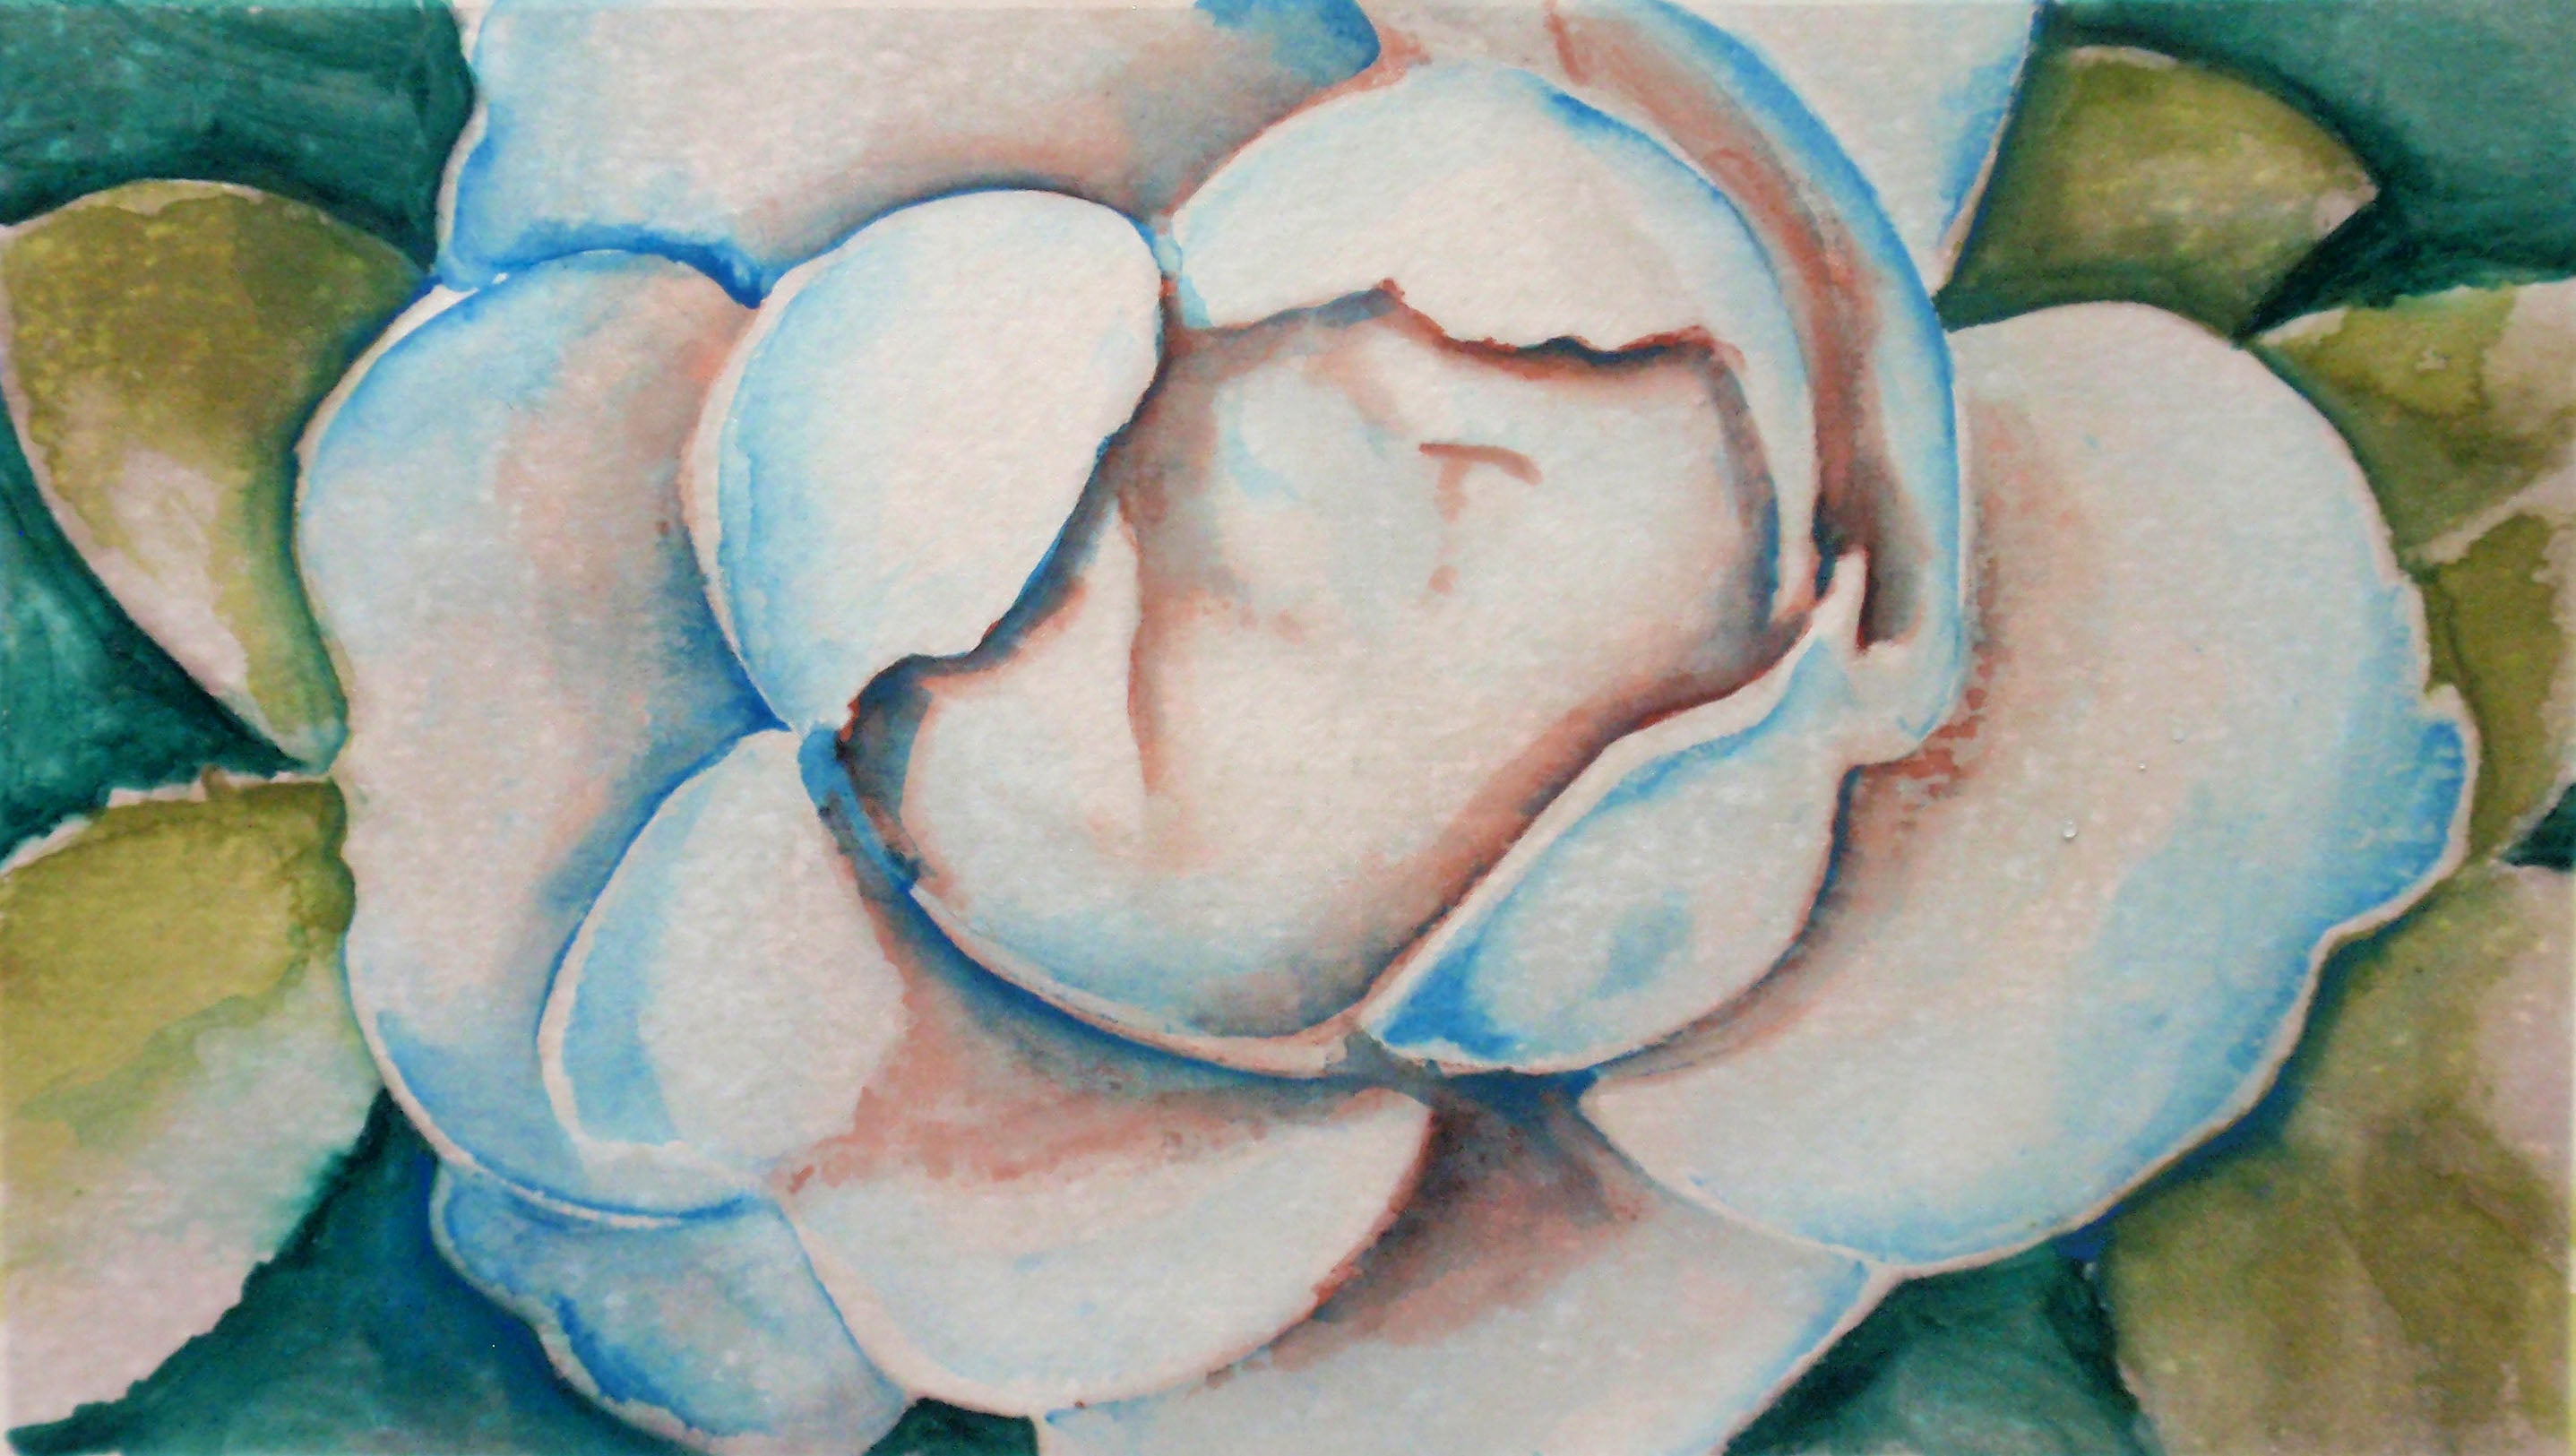 Putting Together My Rosa Gallery Watercolour Paint Palette, with